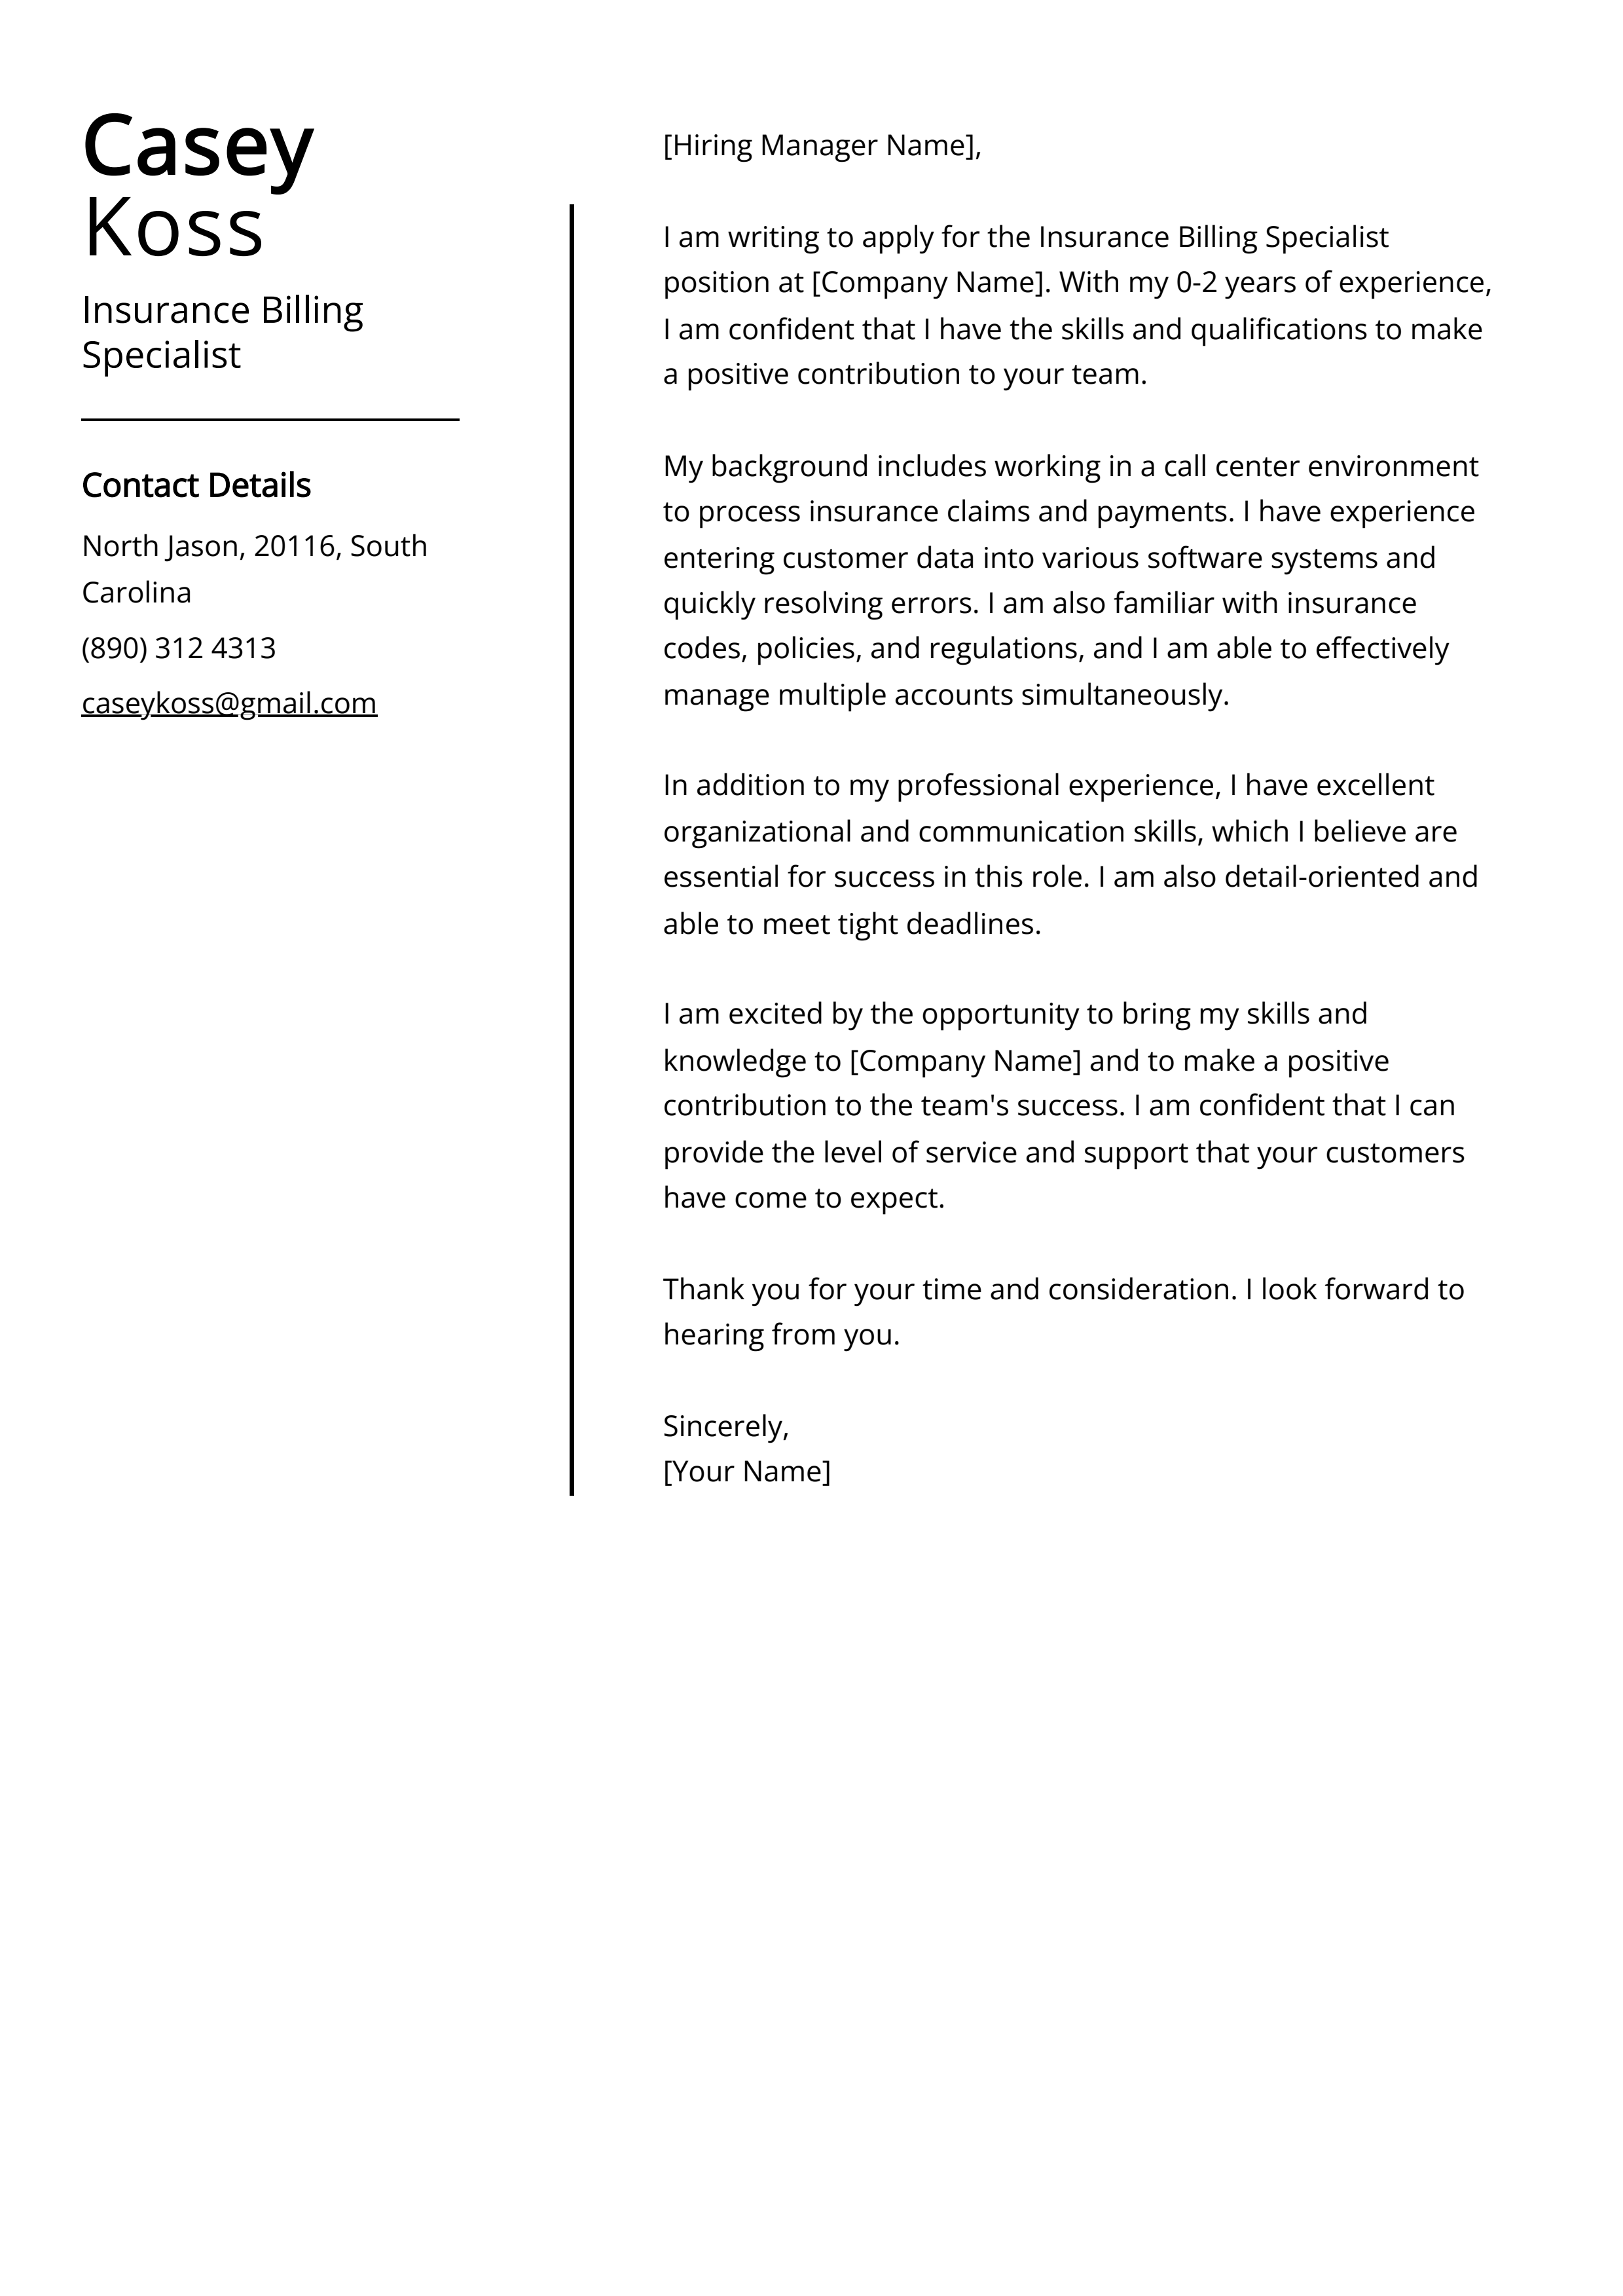 Insurance Billing Specialist Cover Letter Example